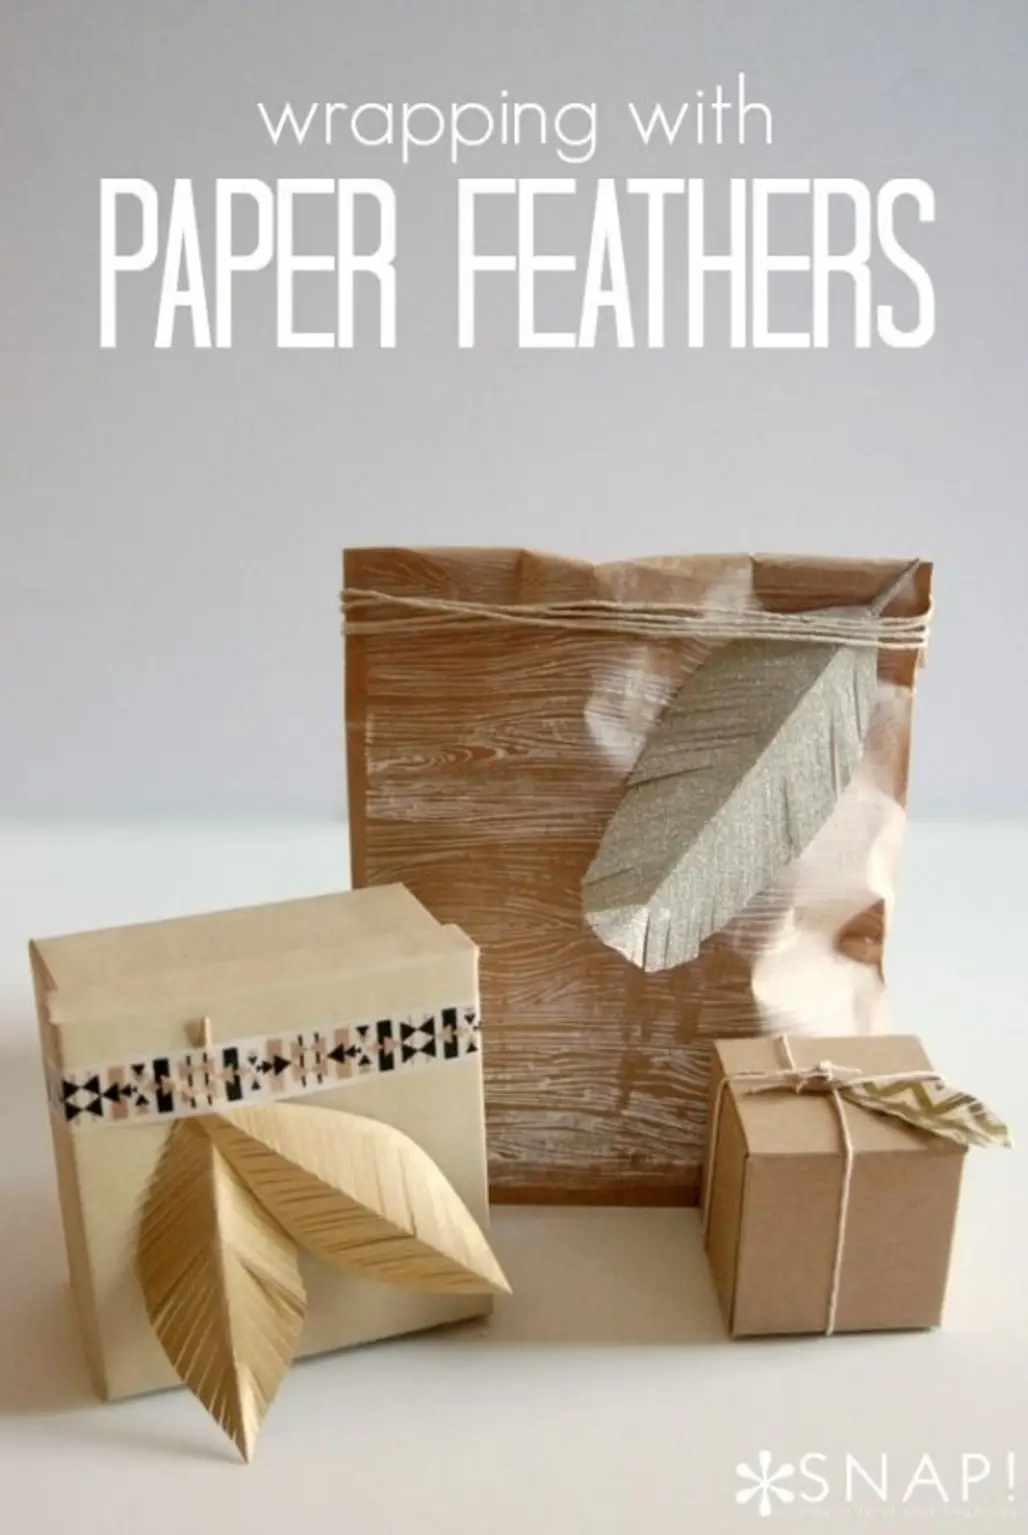 Packaging with Paper Feathers